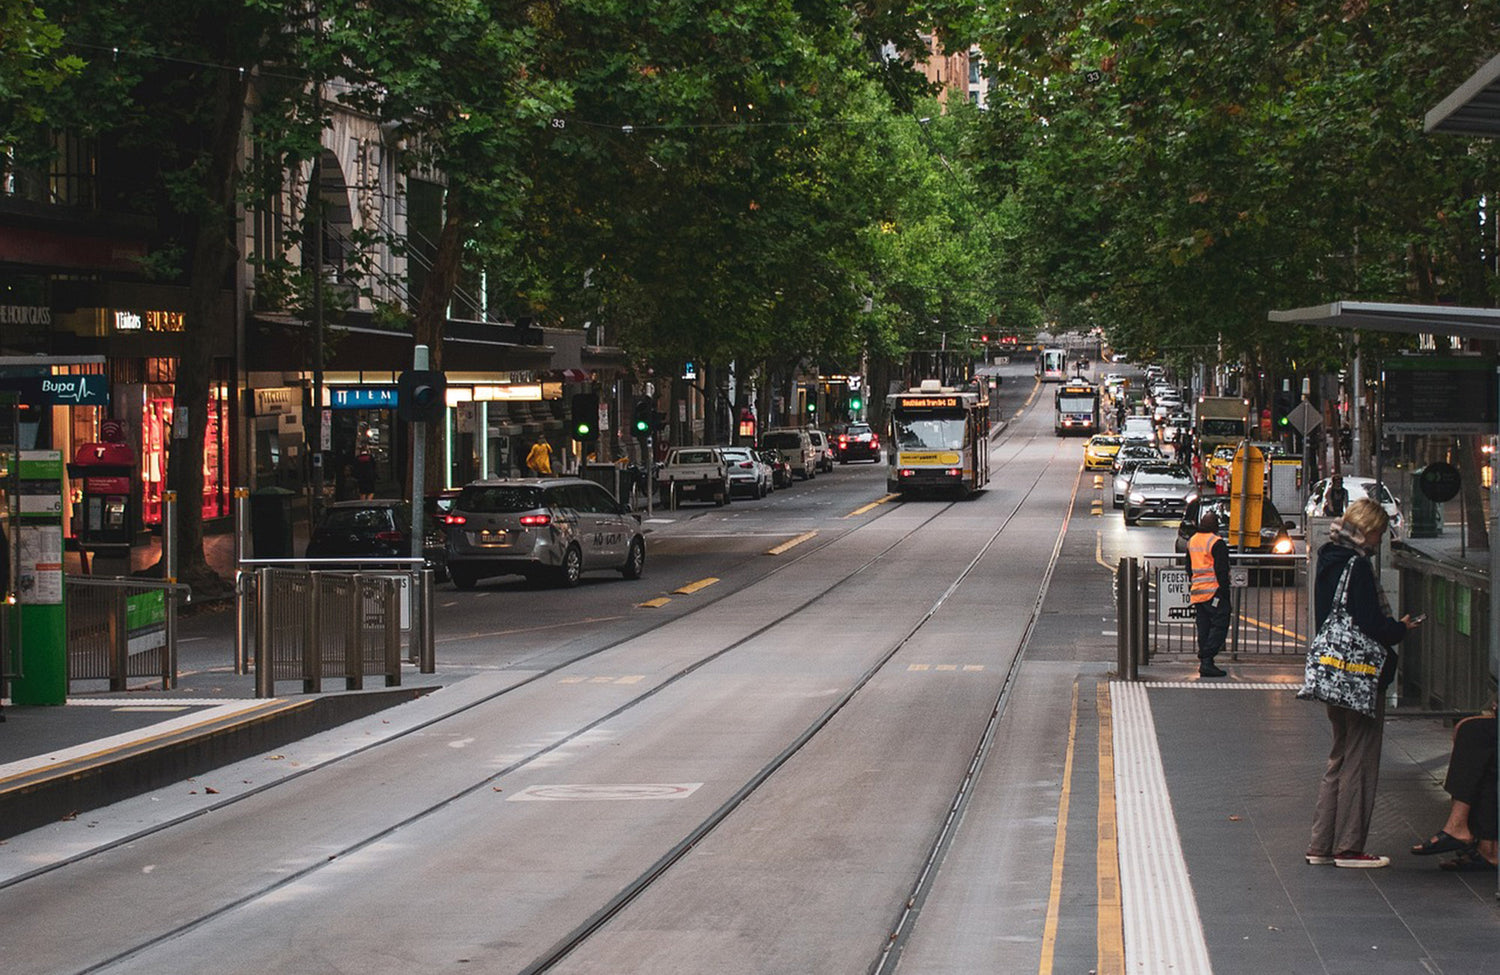 Melbourne CBD with tram lines and Collins Street